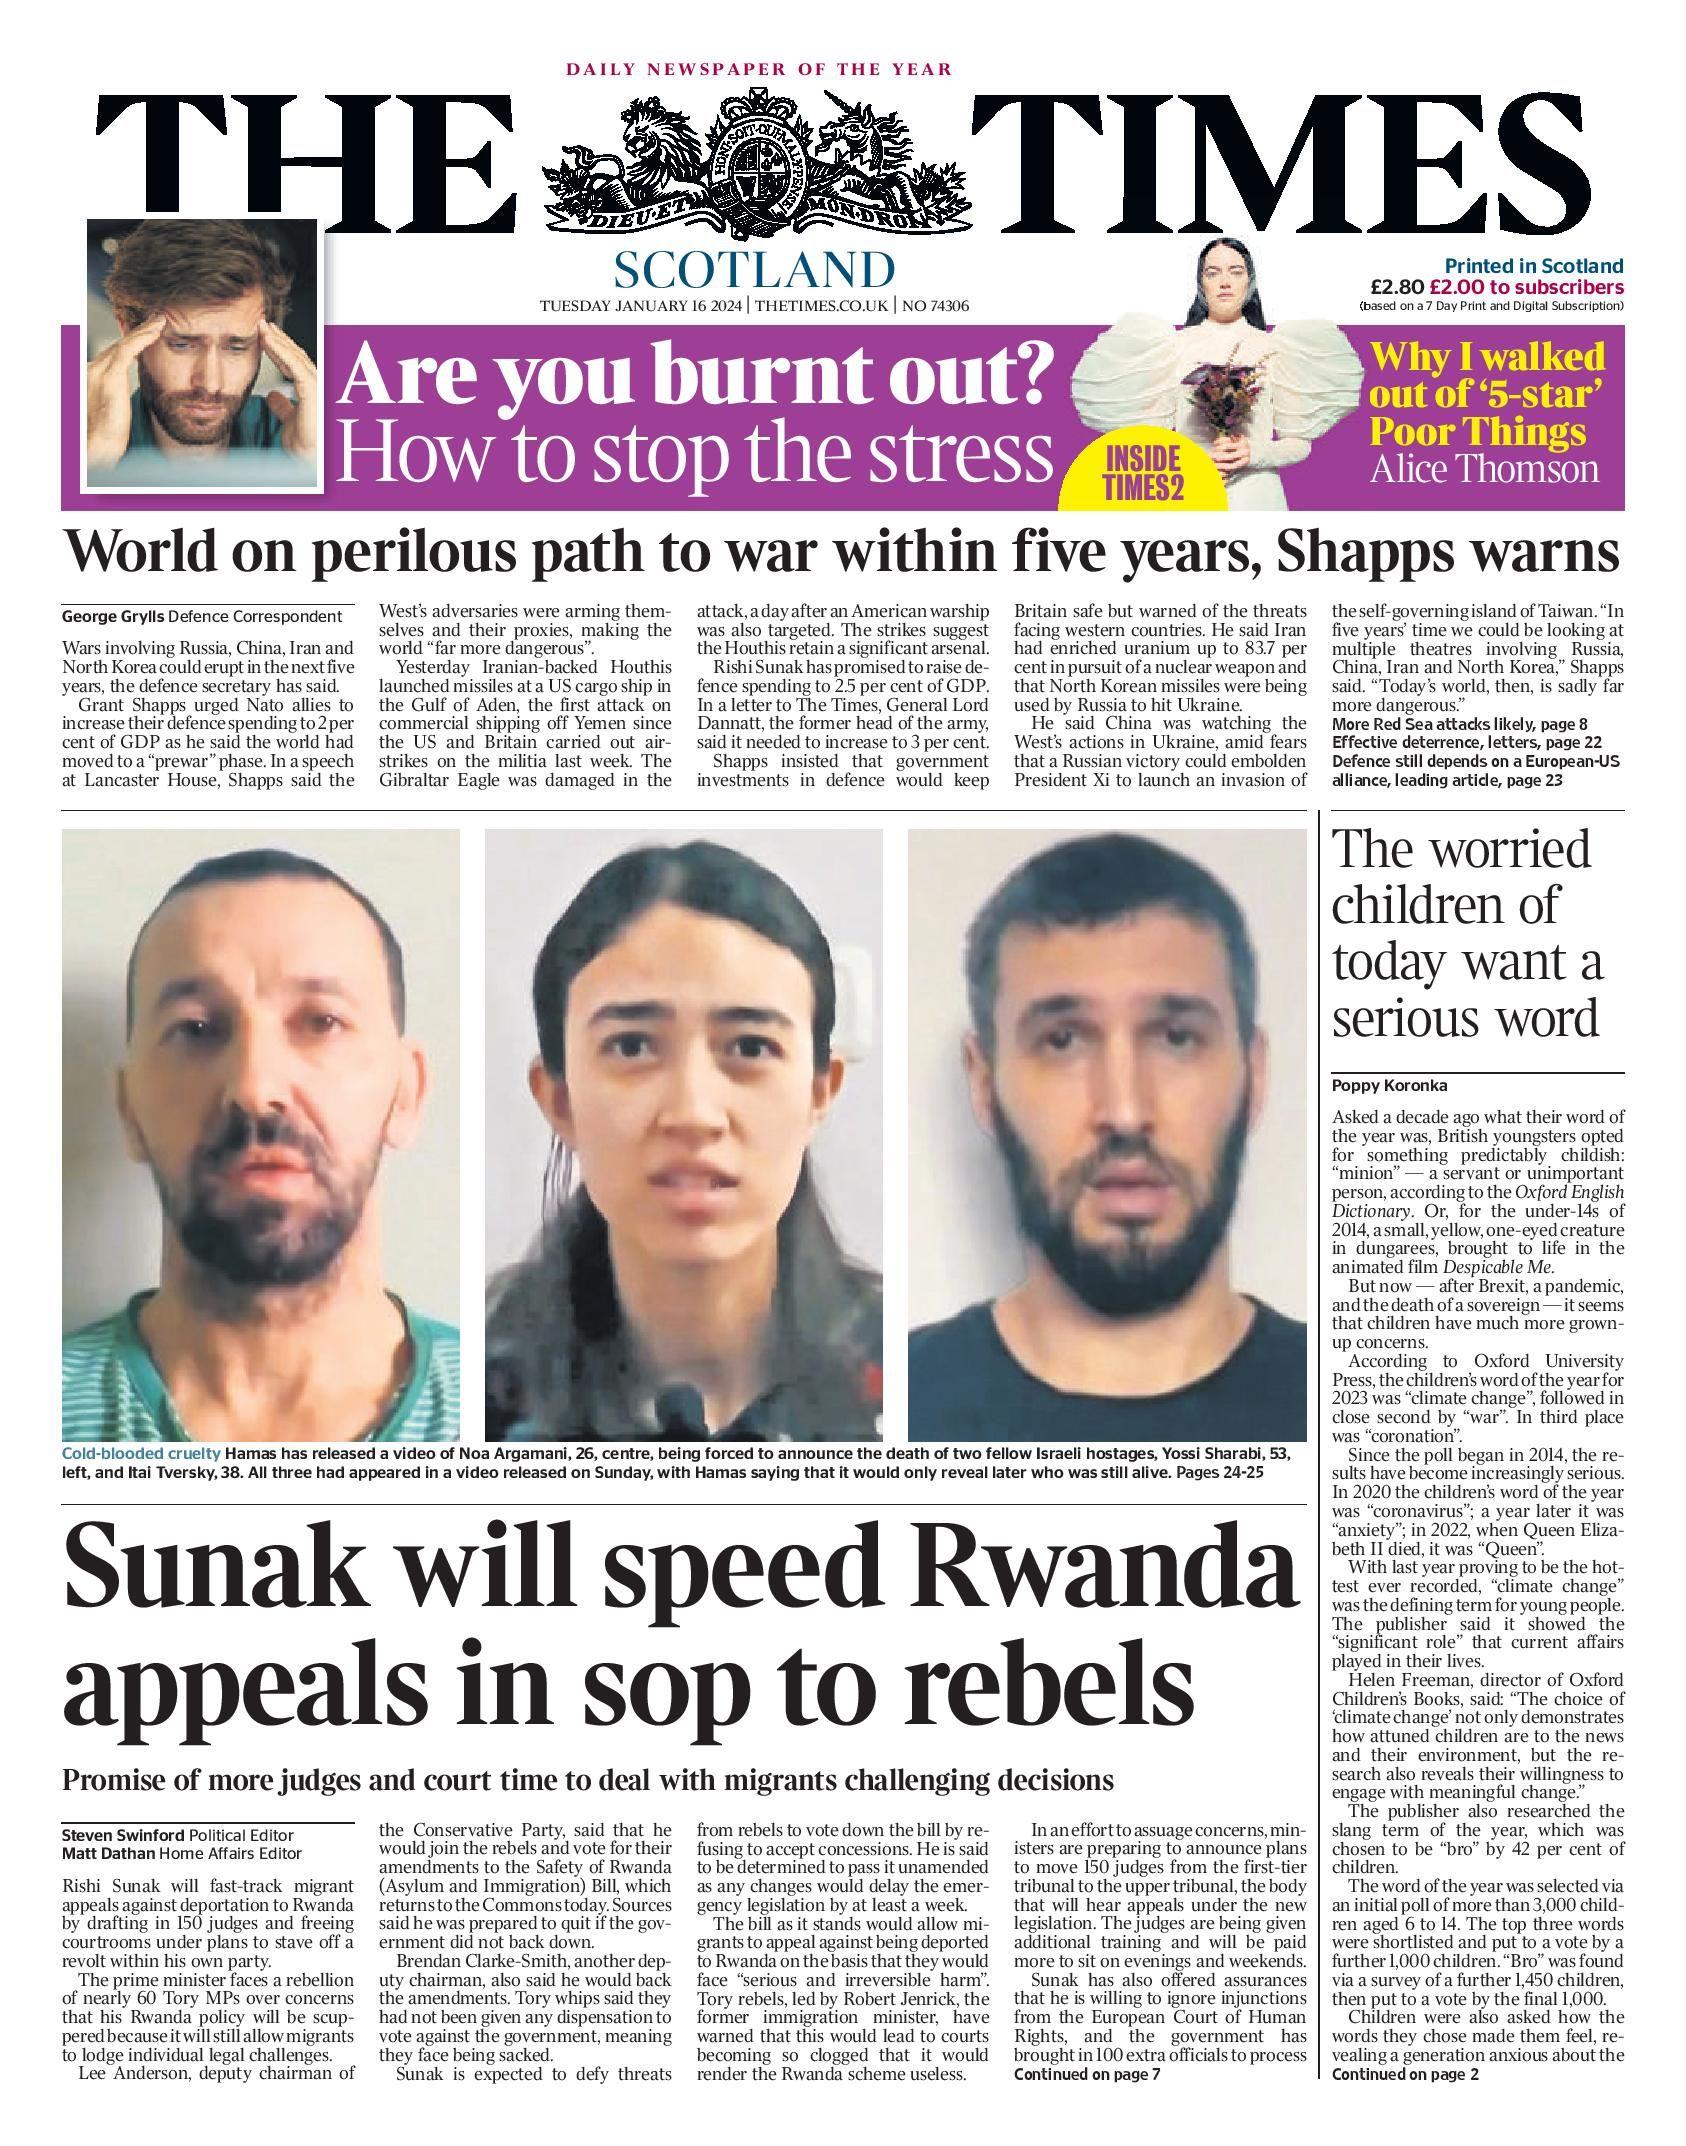 Scotland's papers: Rwanda appeals fast-track and FM's brother-in-law on drug charge